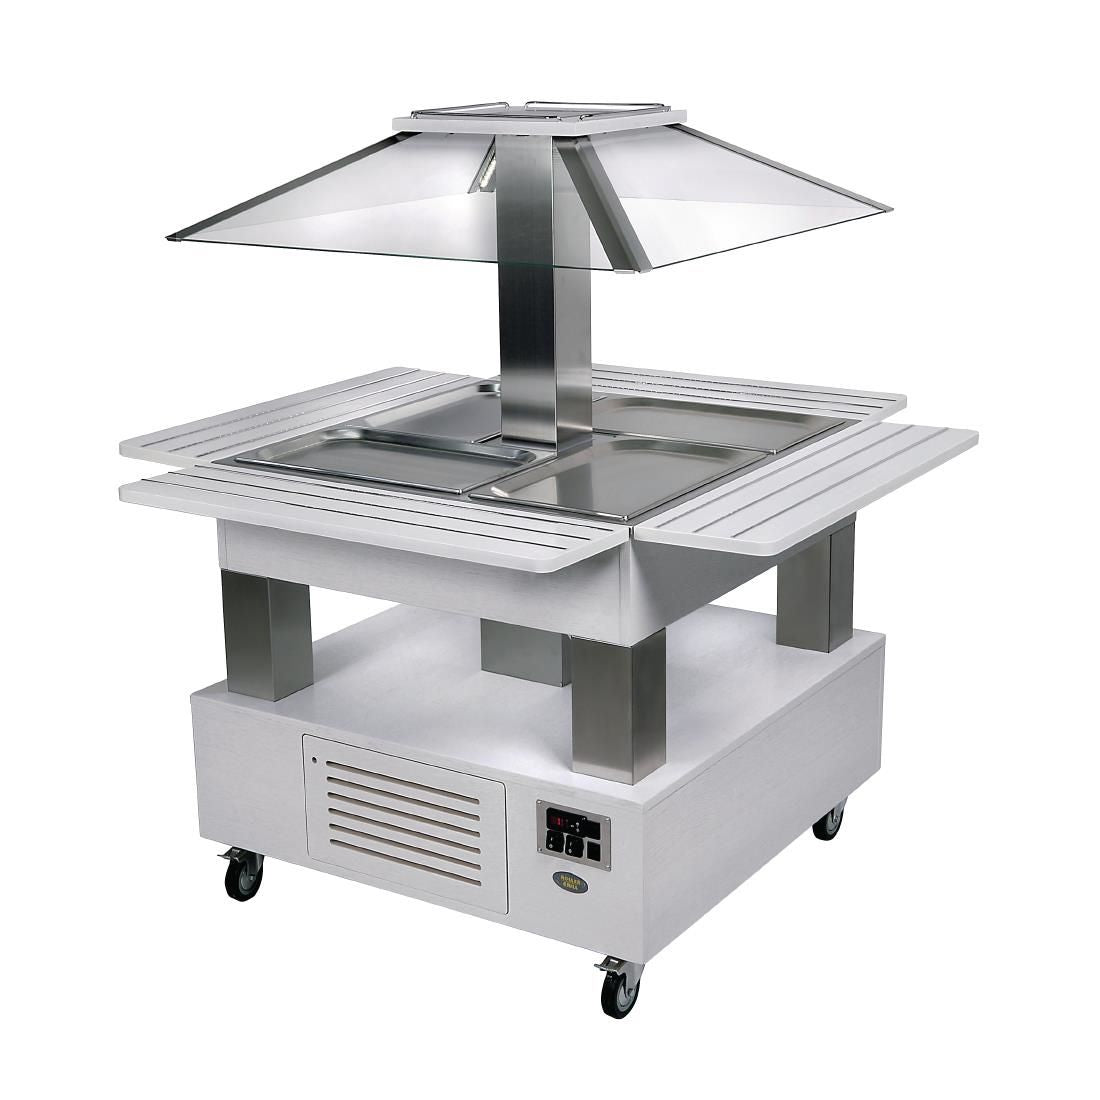 GP309 Roller Grill Heated Salad Bar Square White Wood GP309